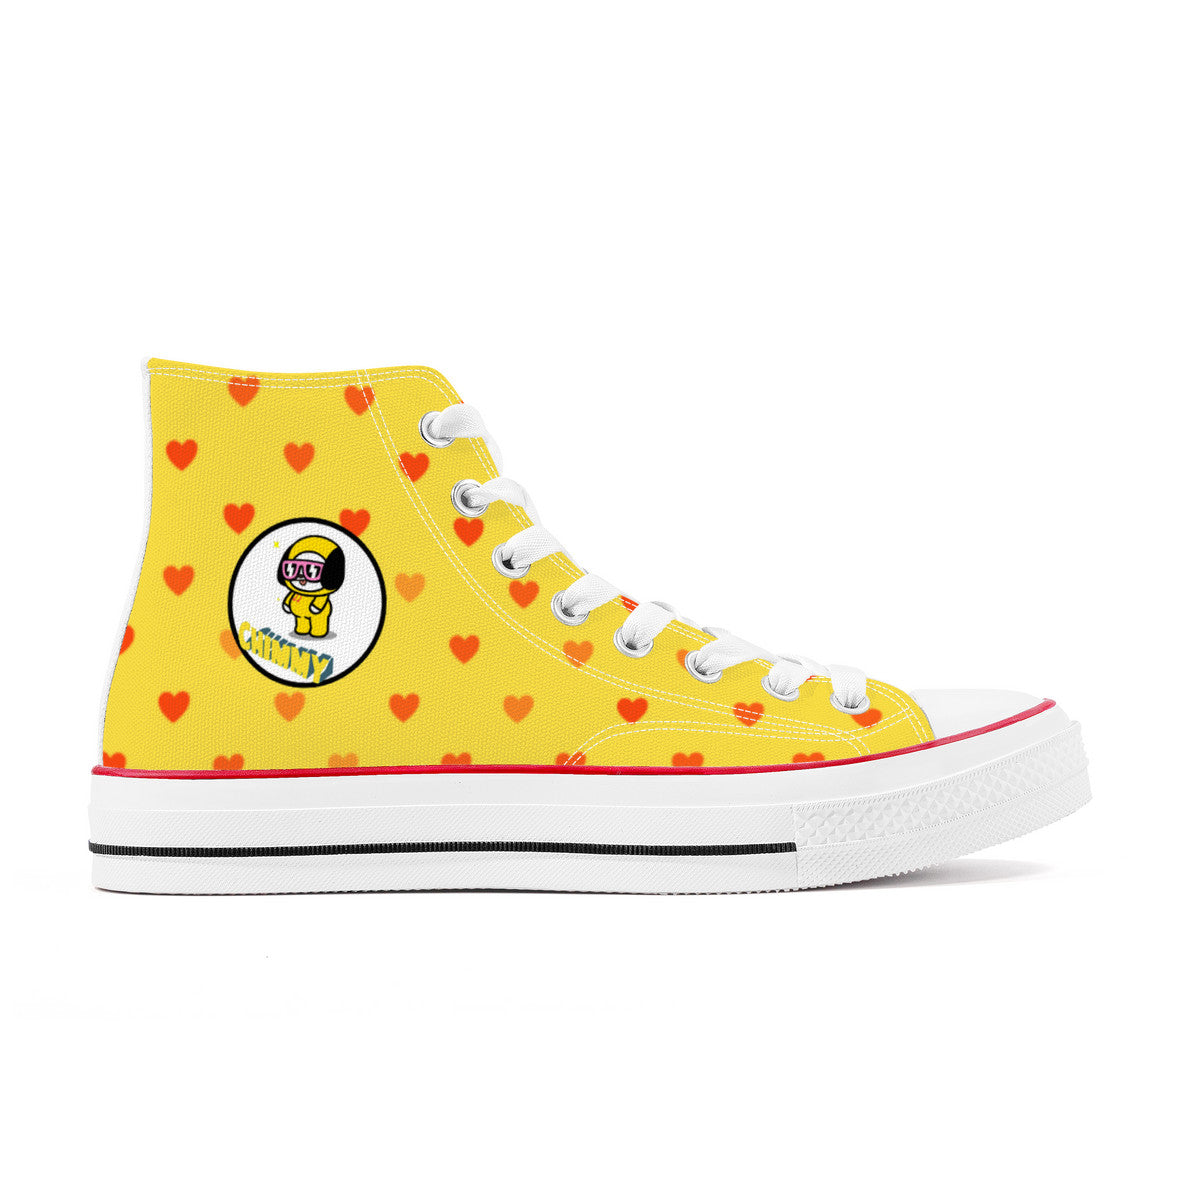 BT21 Chimmy High Top Canvas Sneakers